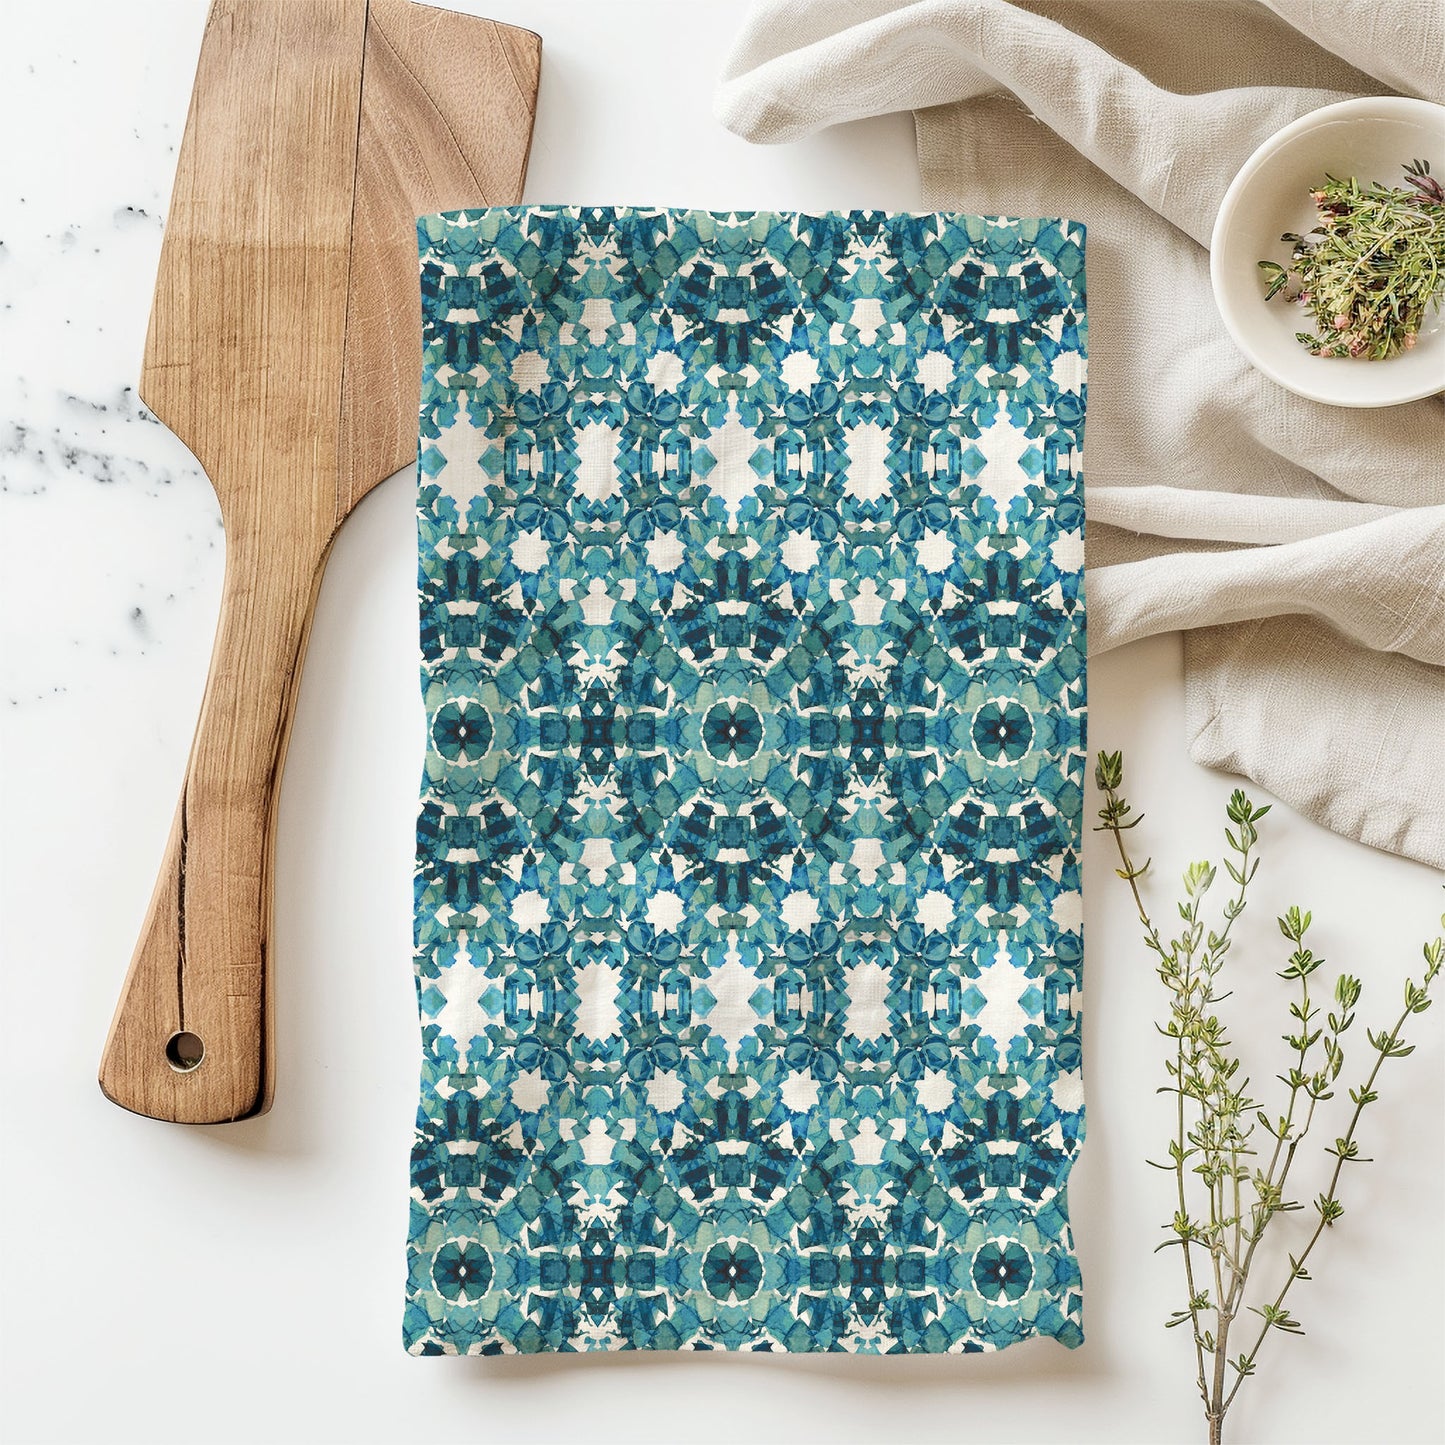 Flour sack tea towel featuring an abstract teal hand-painted pattern